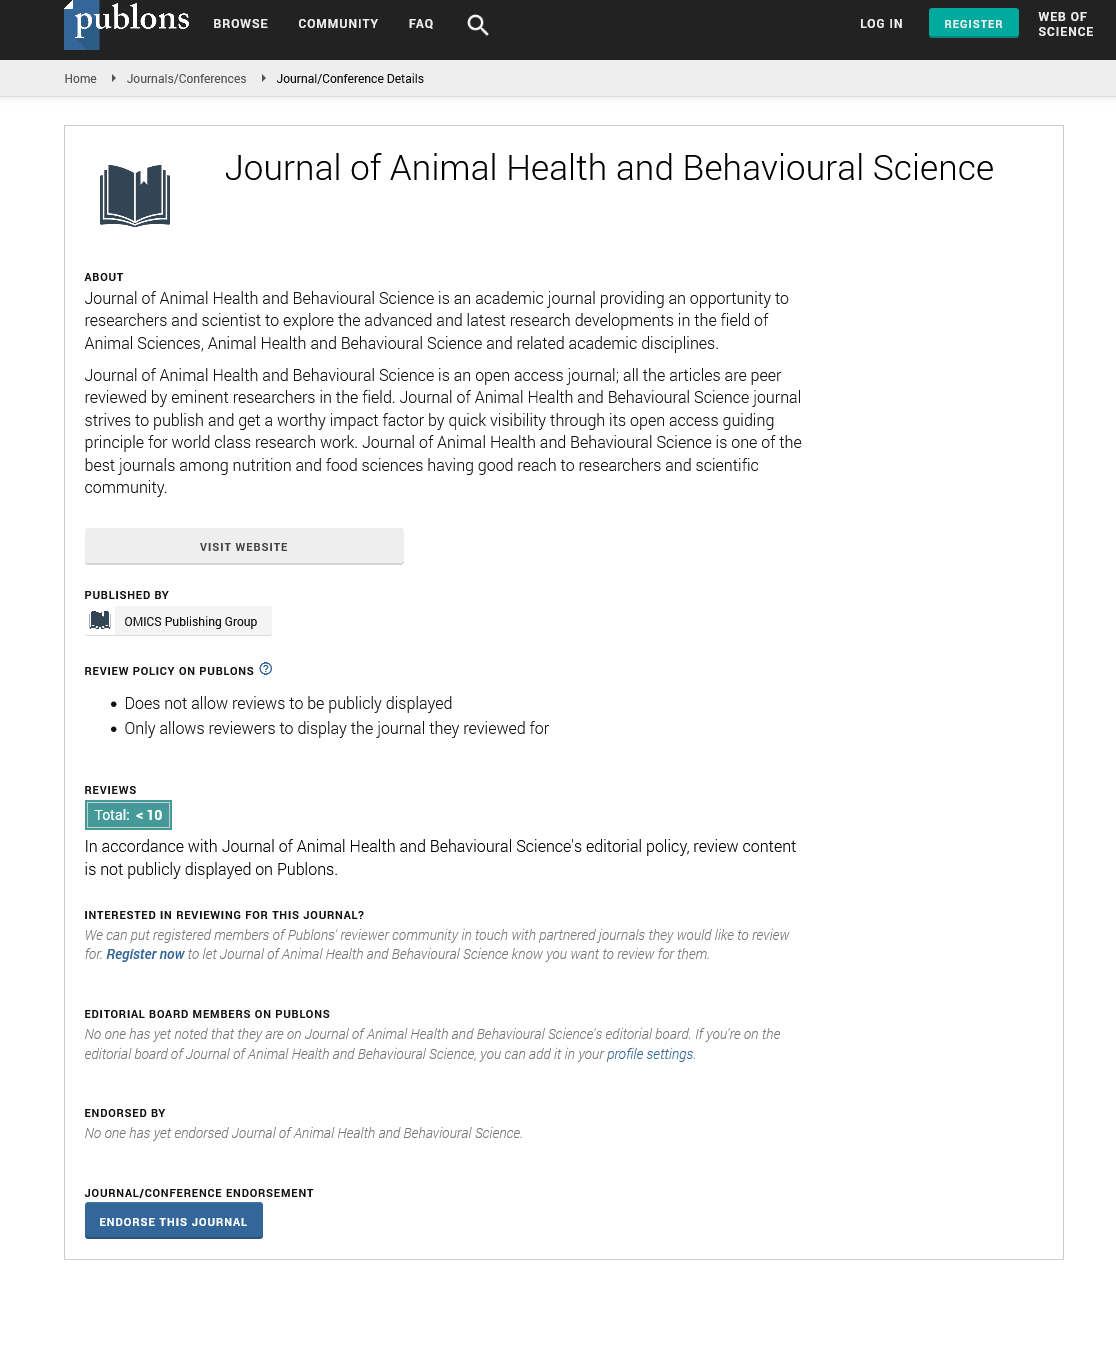 Journal of Animal Health and Behavioural Science- Open Access Journals